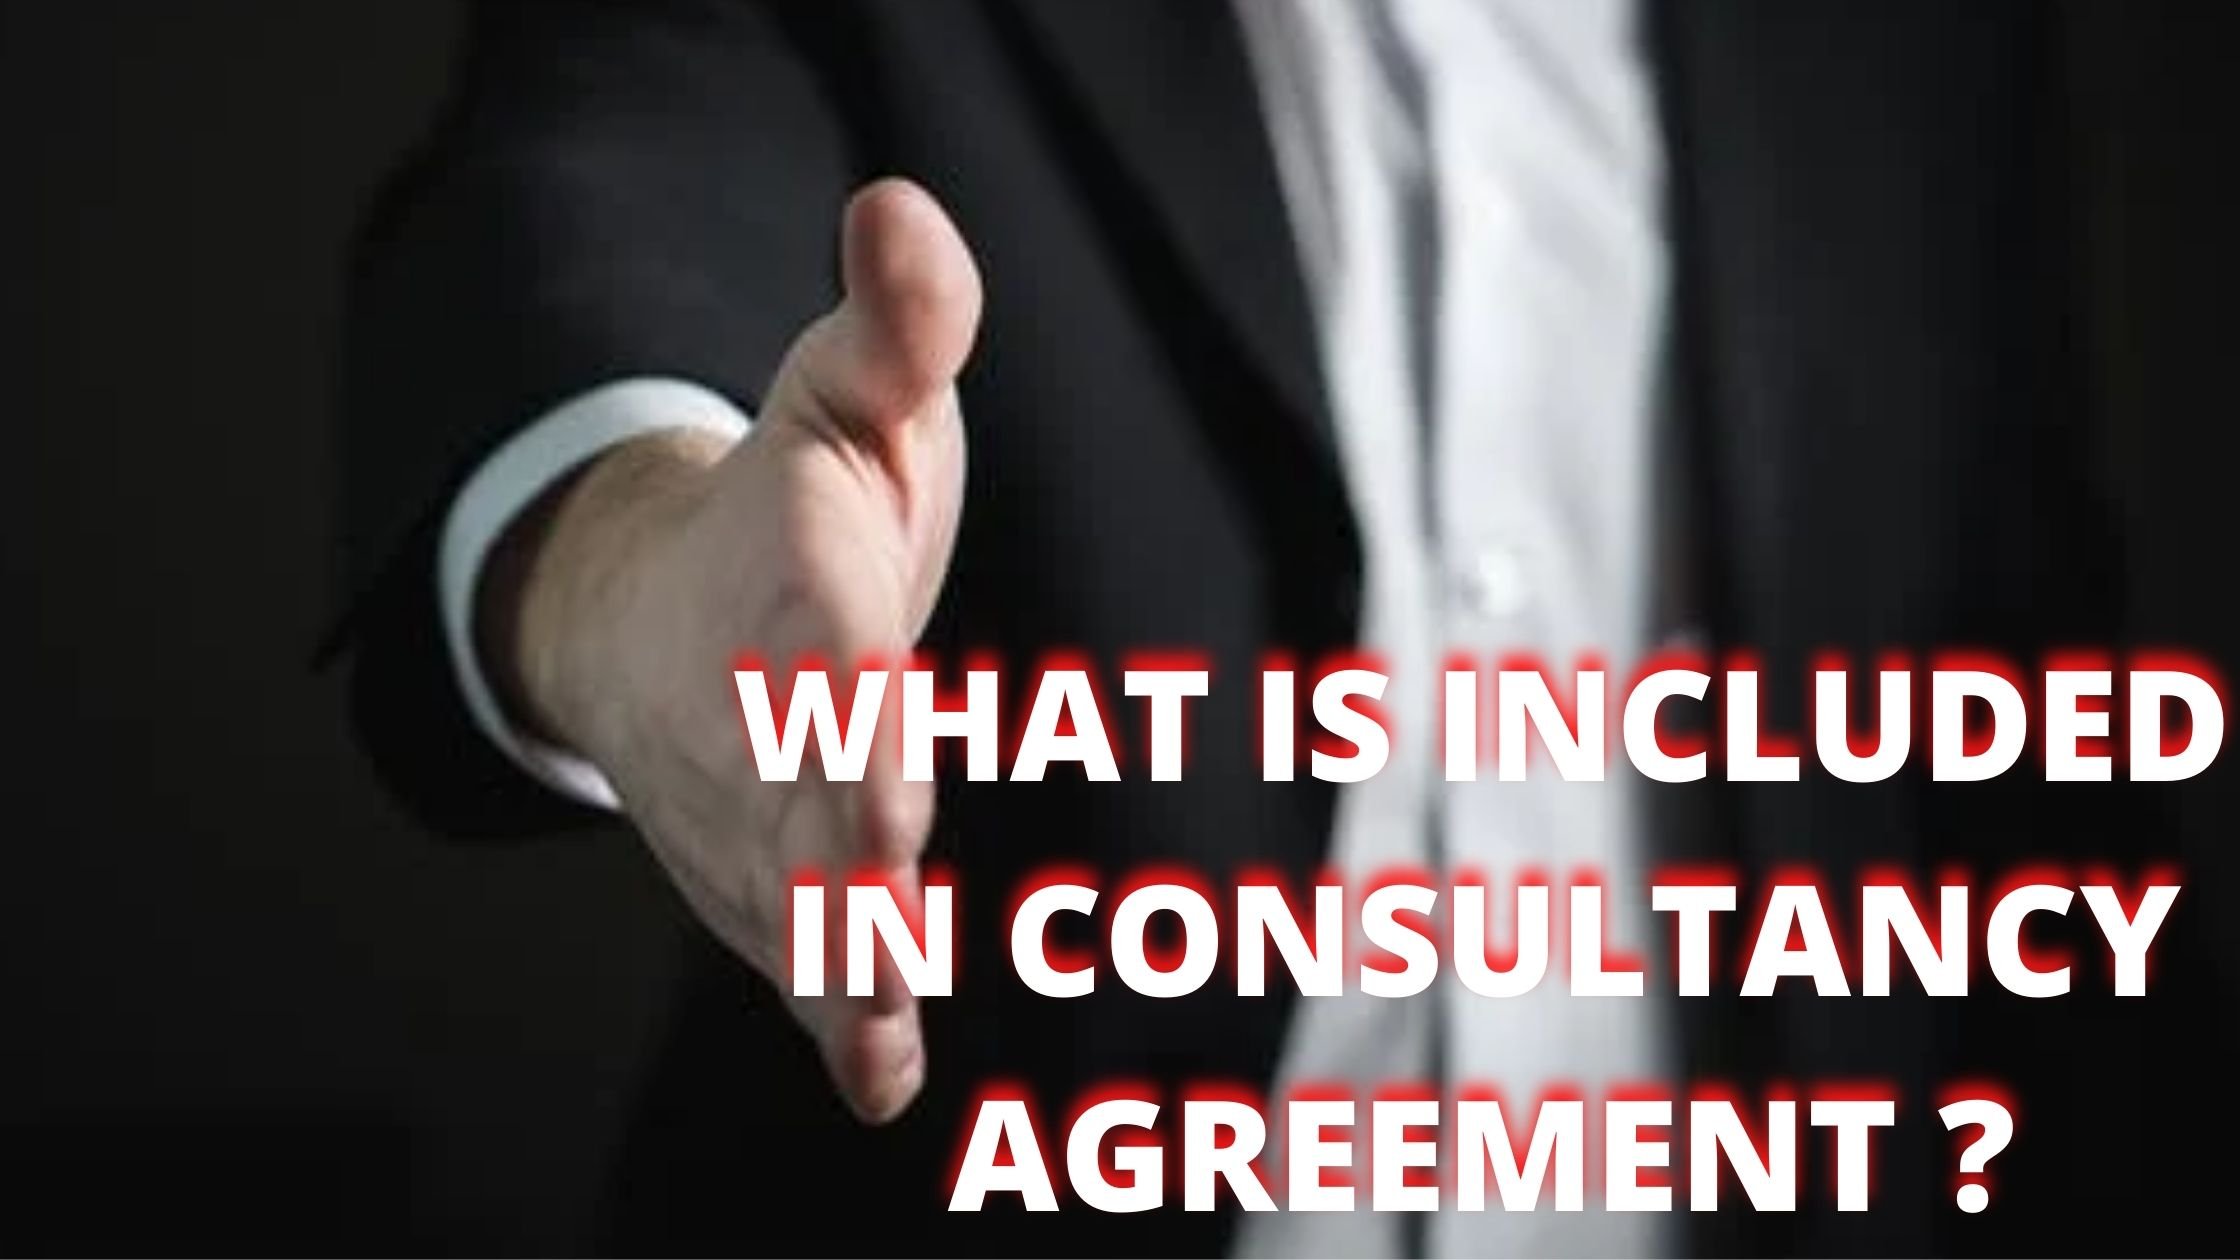 WHAT TO INCLUDE IN A CONSULTANCY AGREEMENT?